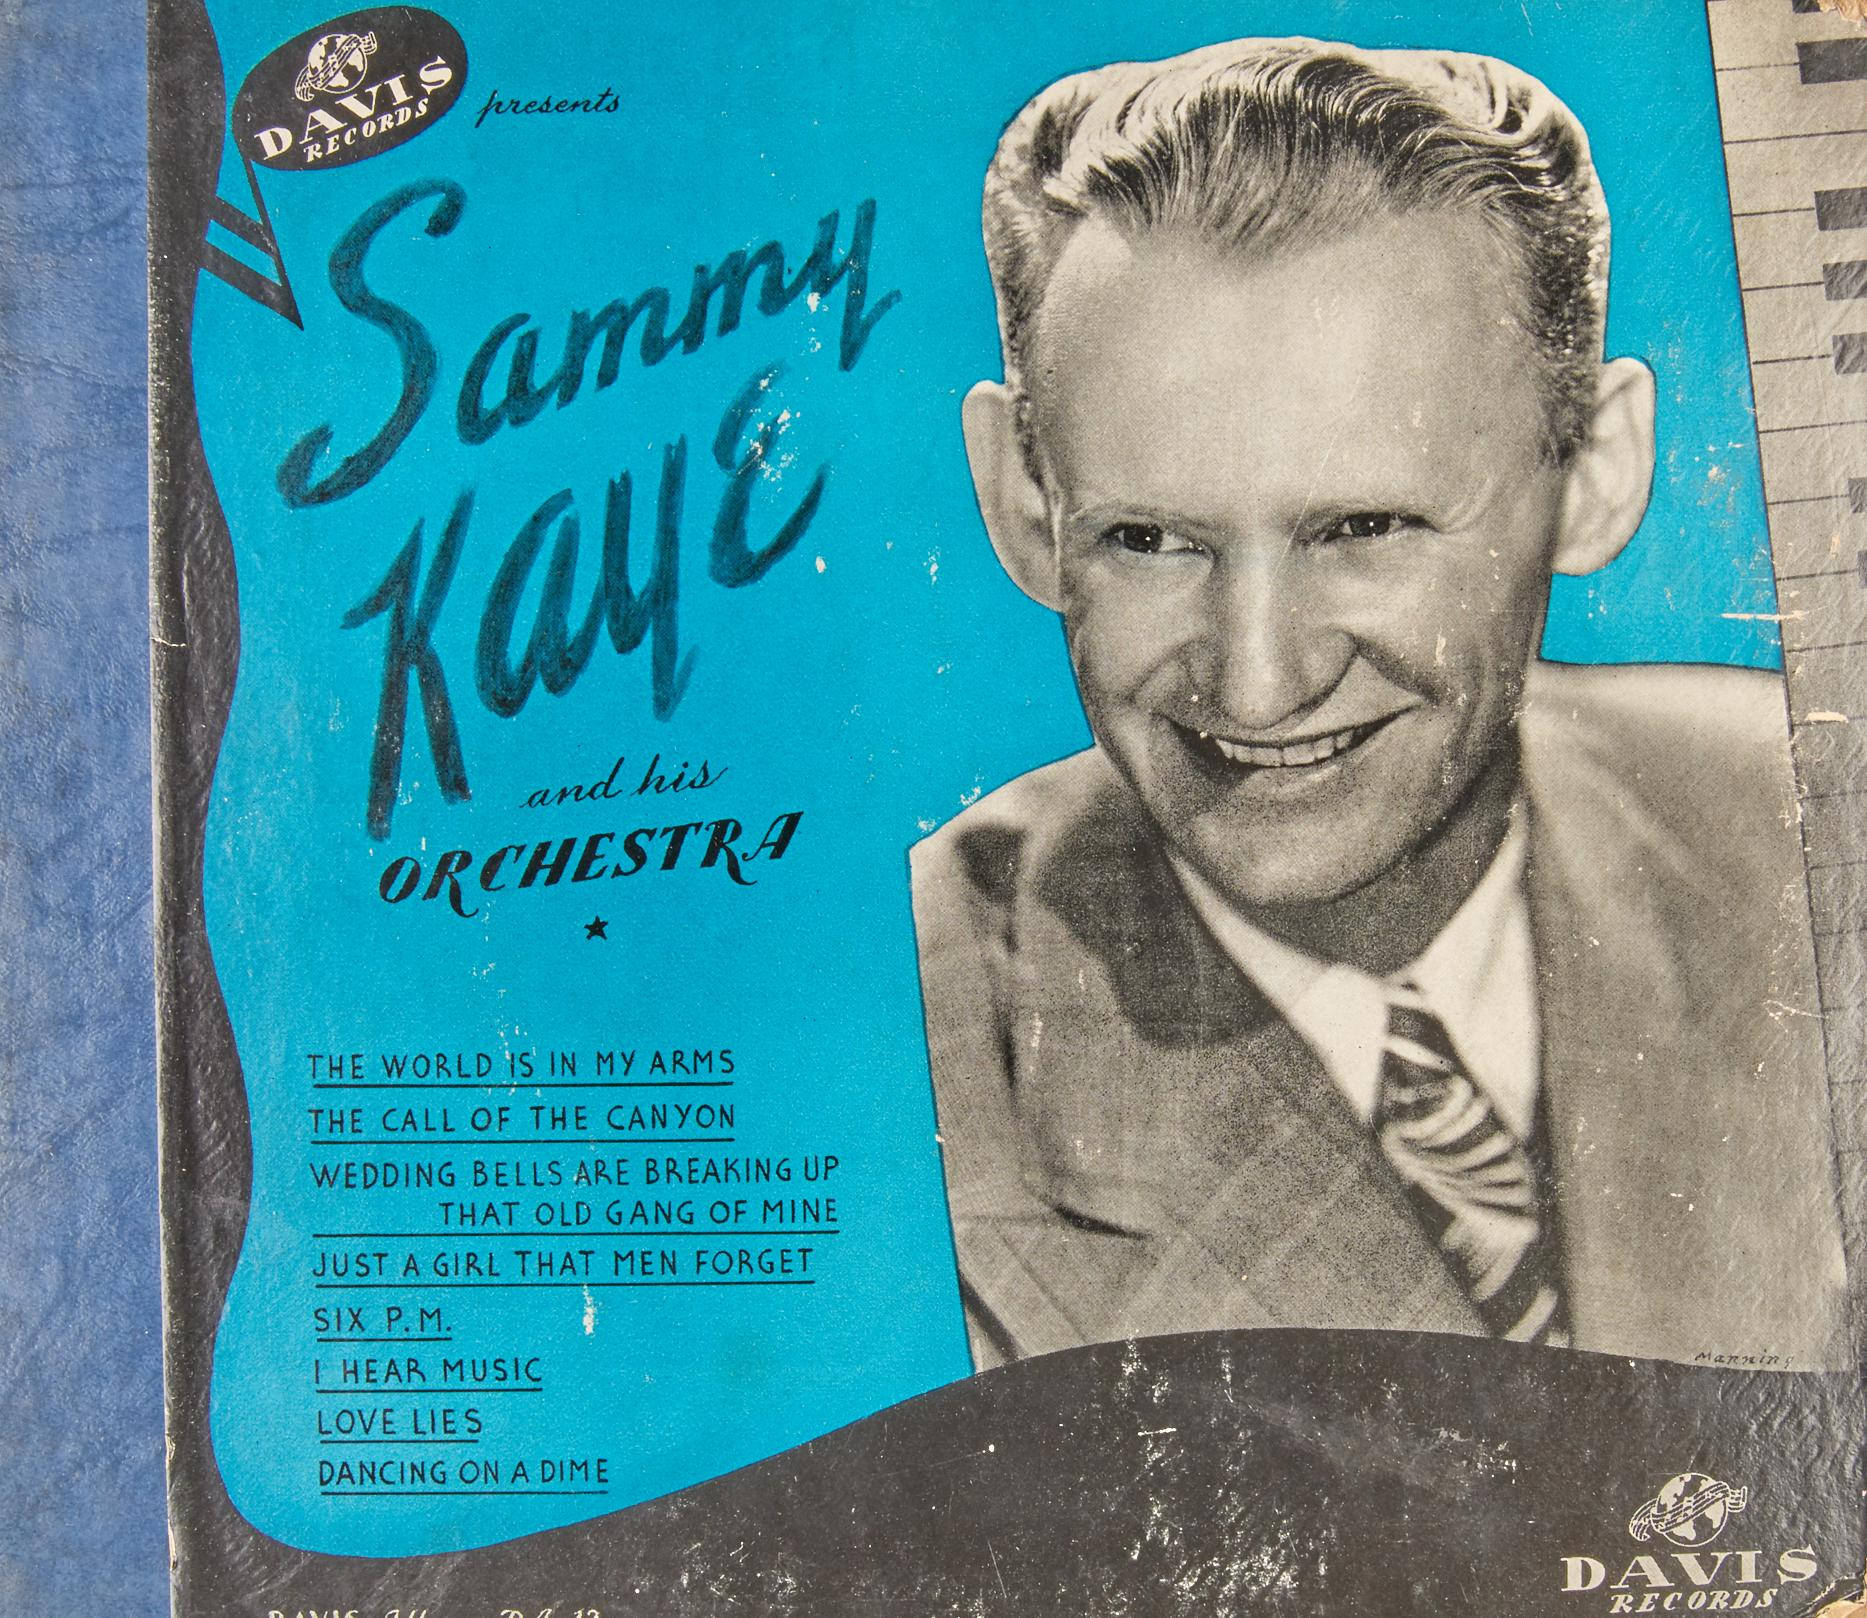 Sammy Kaye And His Orchestra Album Cover Wallpaper